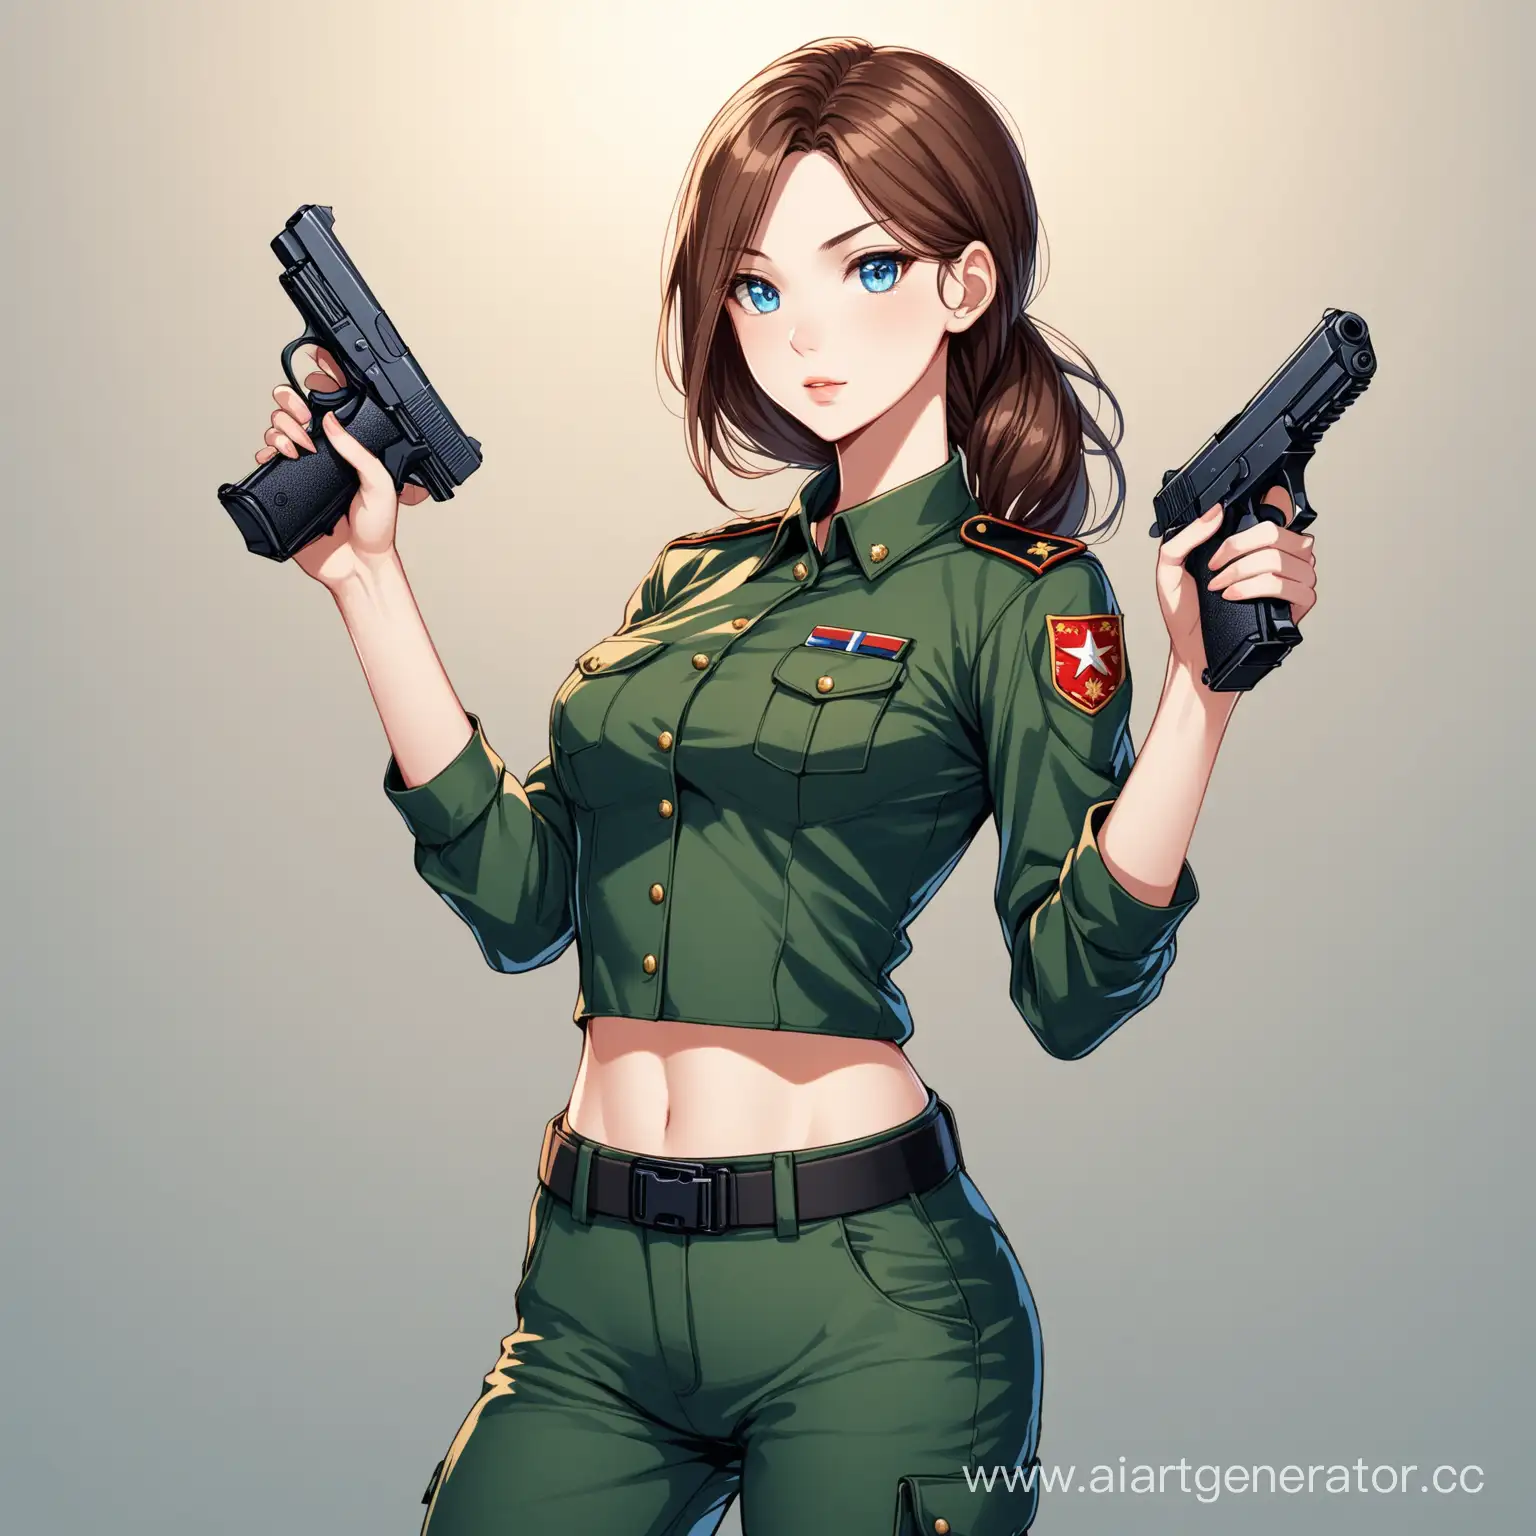 Attractive-Young-Woman-with-Pistol-in-Military-Attire